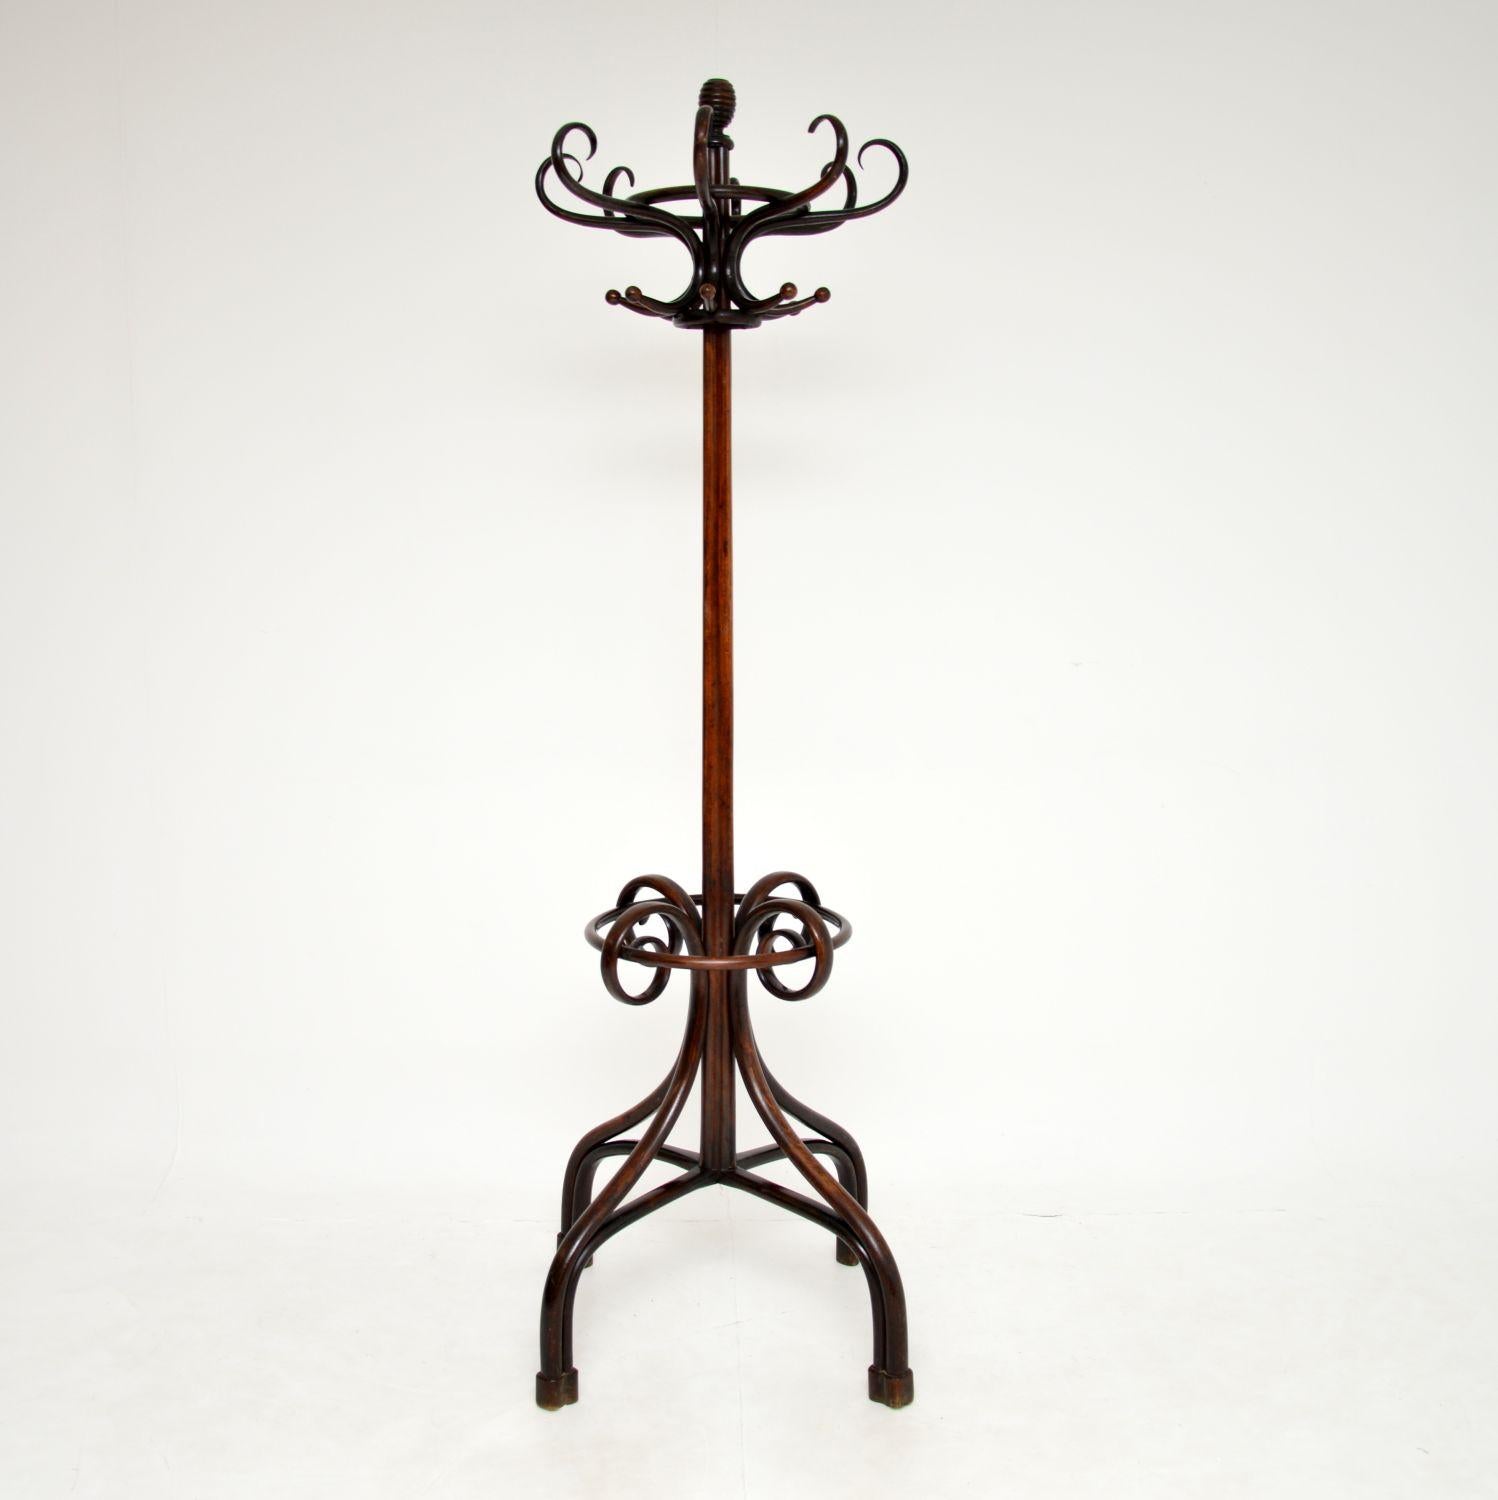 An amazing original antique bentwood hat stand. This was made in central Europe, most likely by Thonet in Austria around the 1880-1900 period.

It is a fantastic model, with a very wide and beautifully curvaceous base. It has eight beautifully